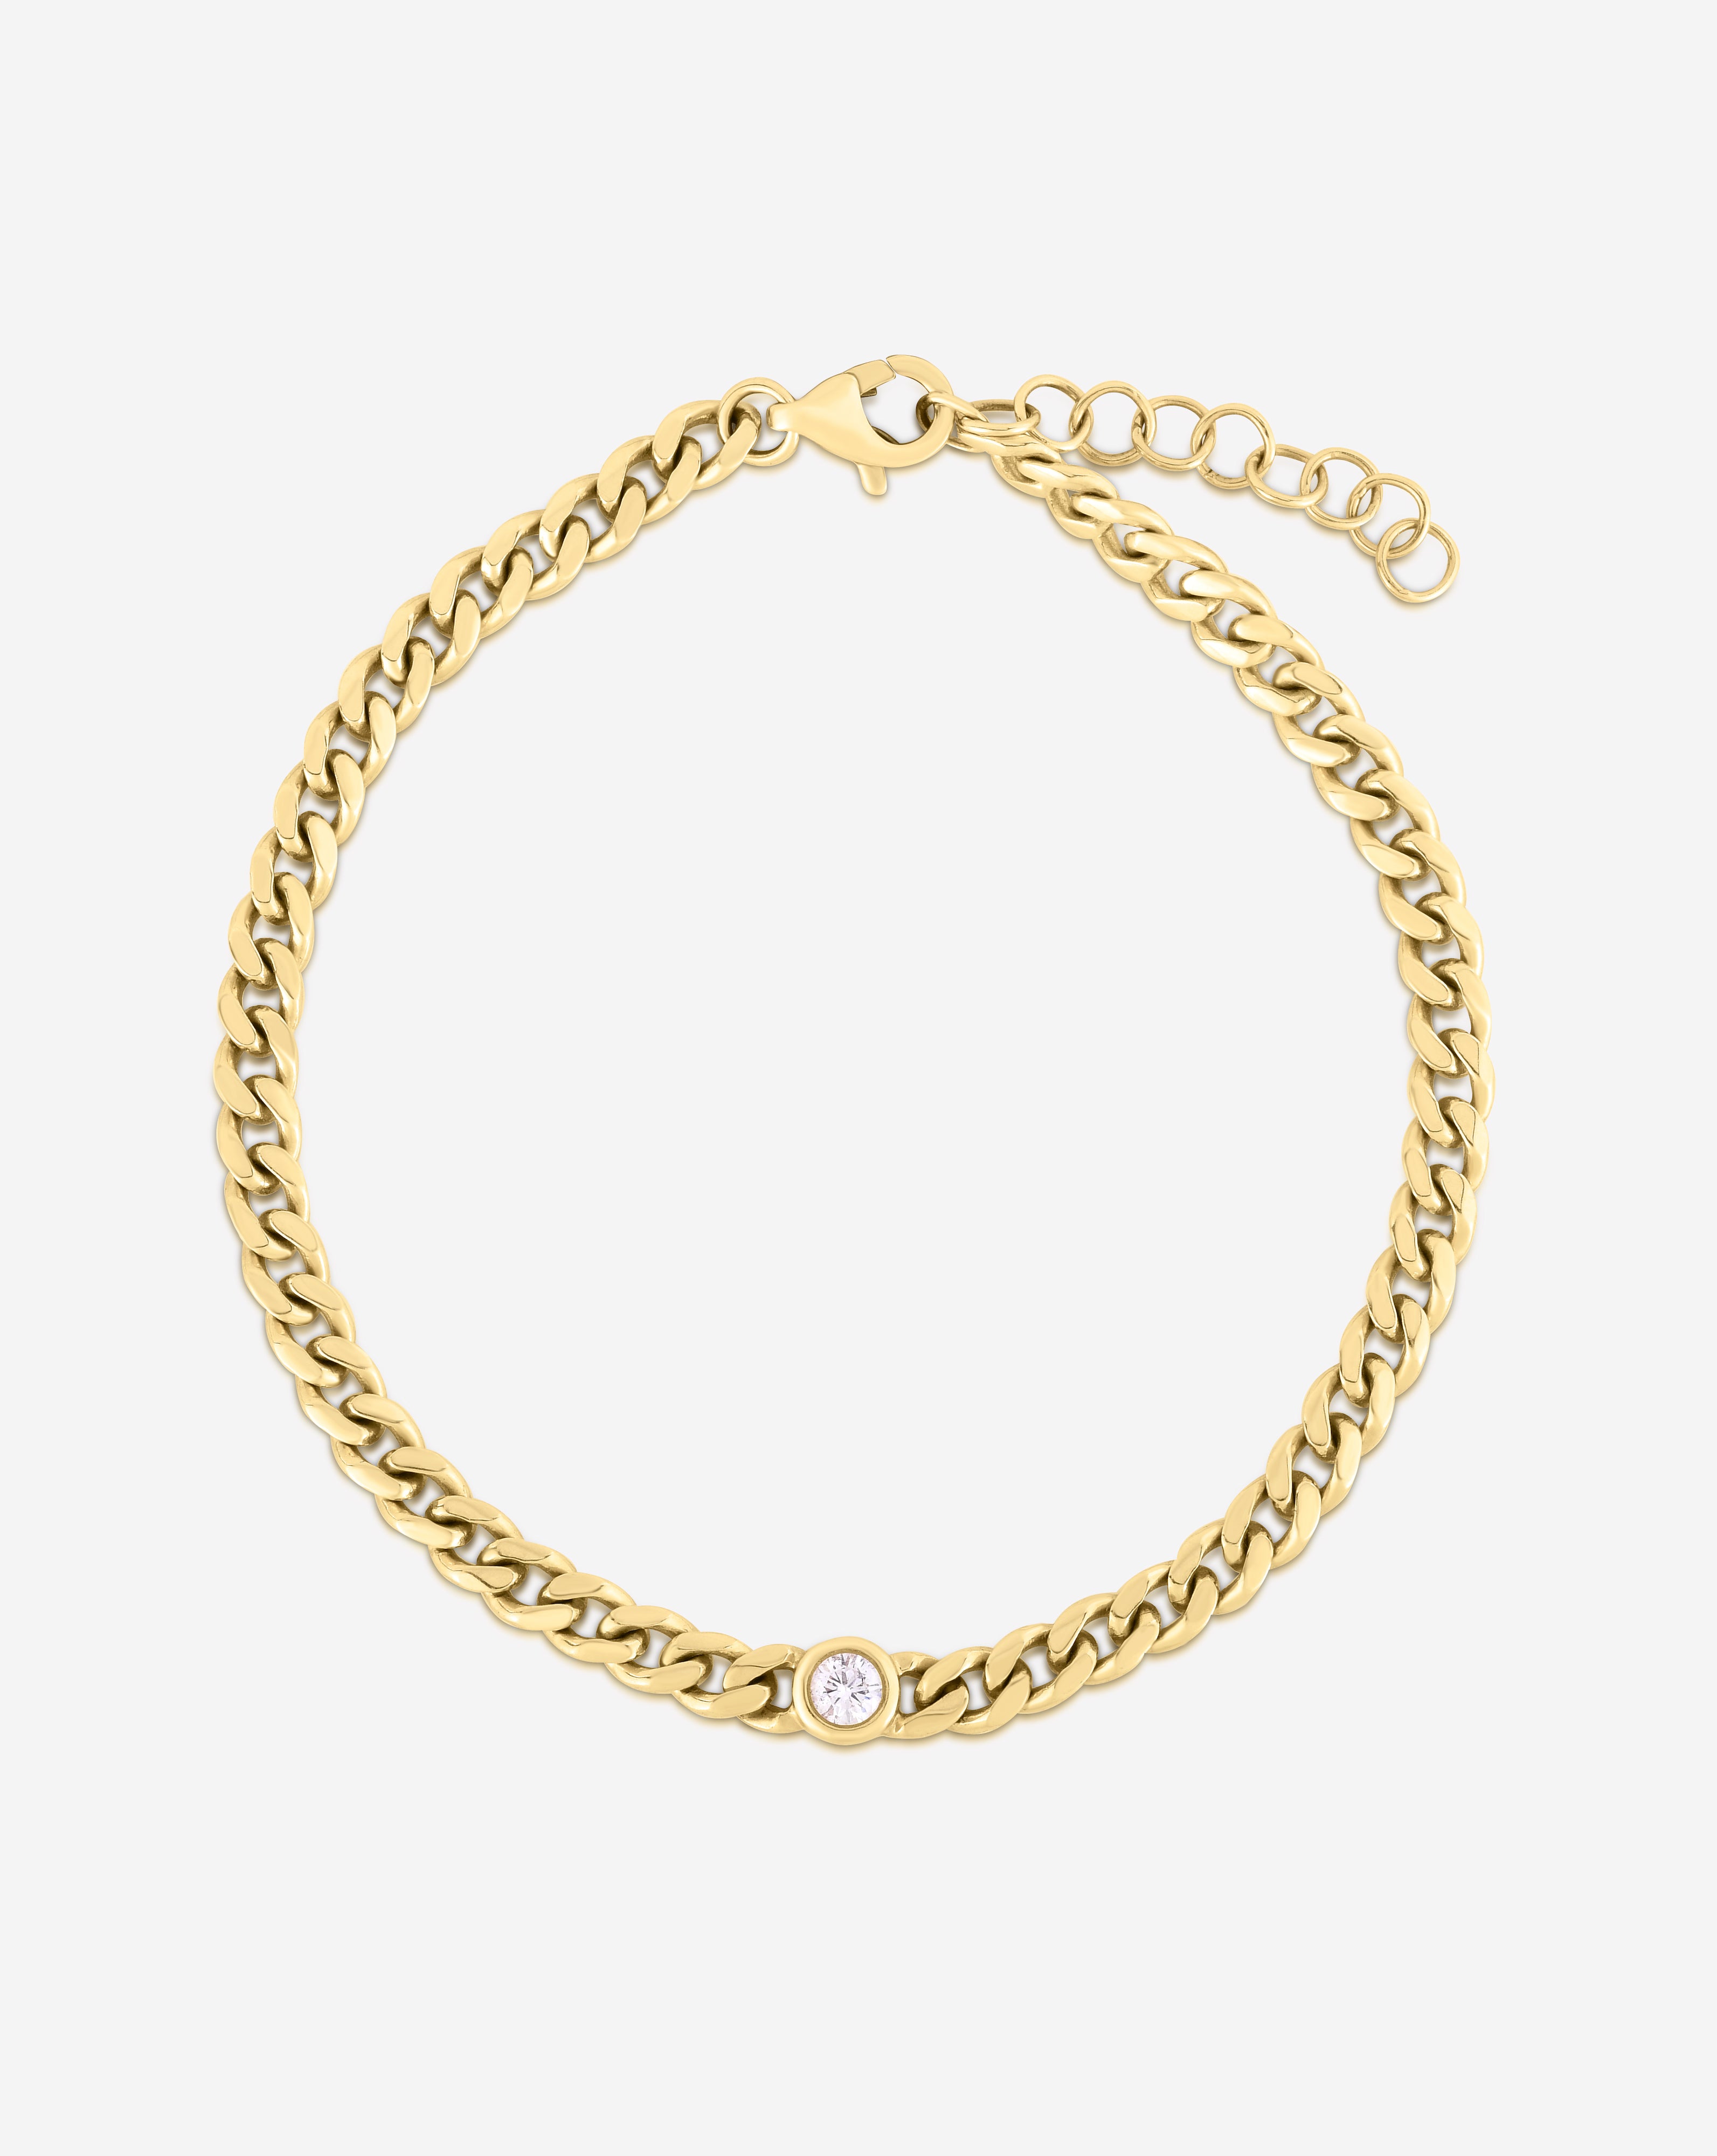 Lifetime Jewelry Gold Chain Bracelets for Men and Women [ 7mm Rope India |  Ubuy